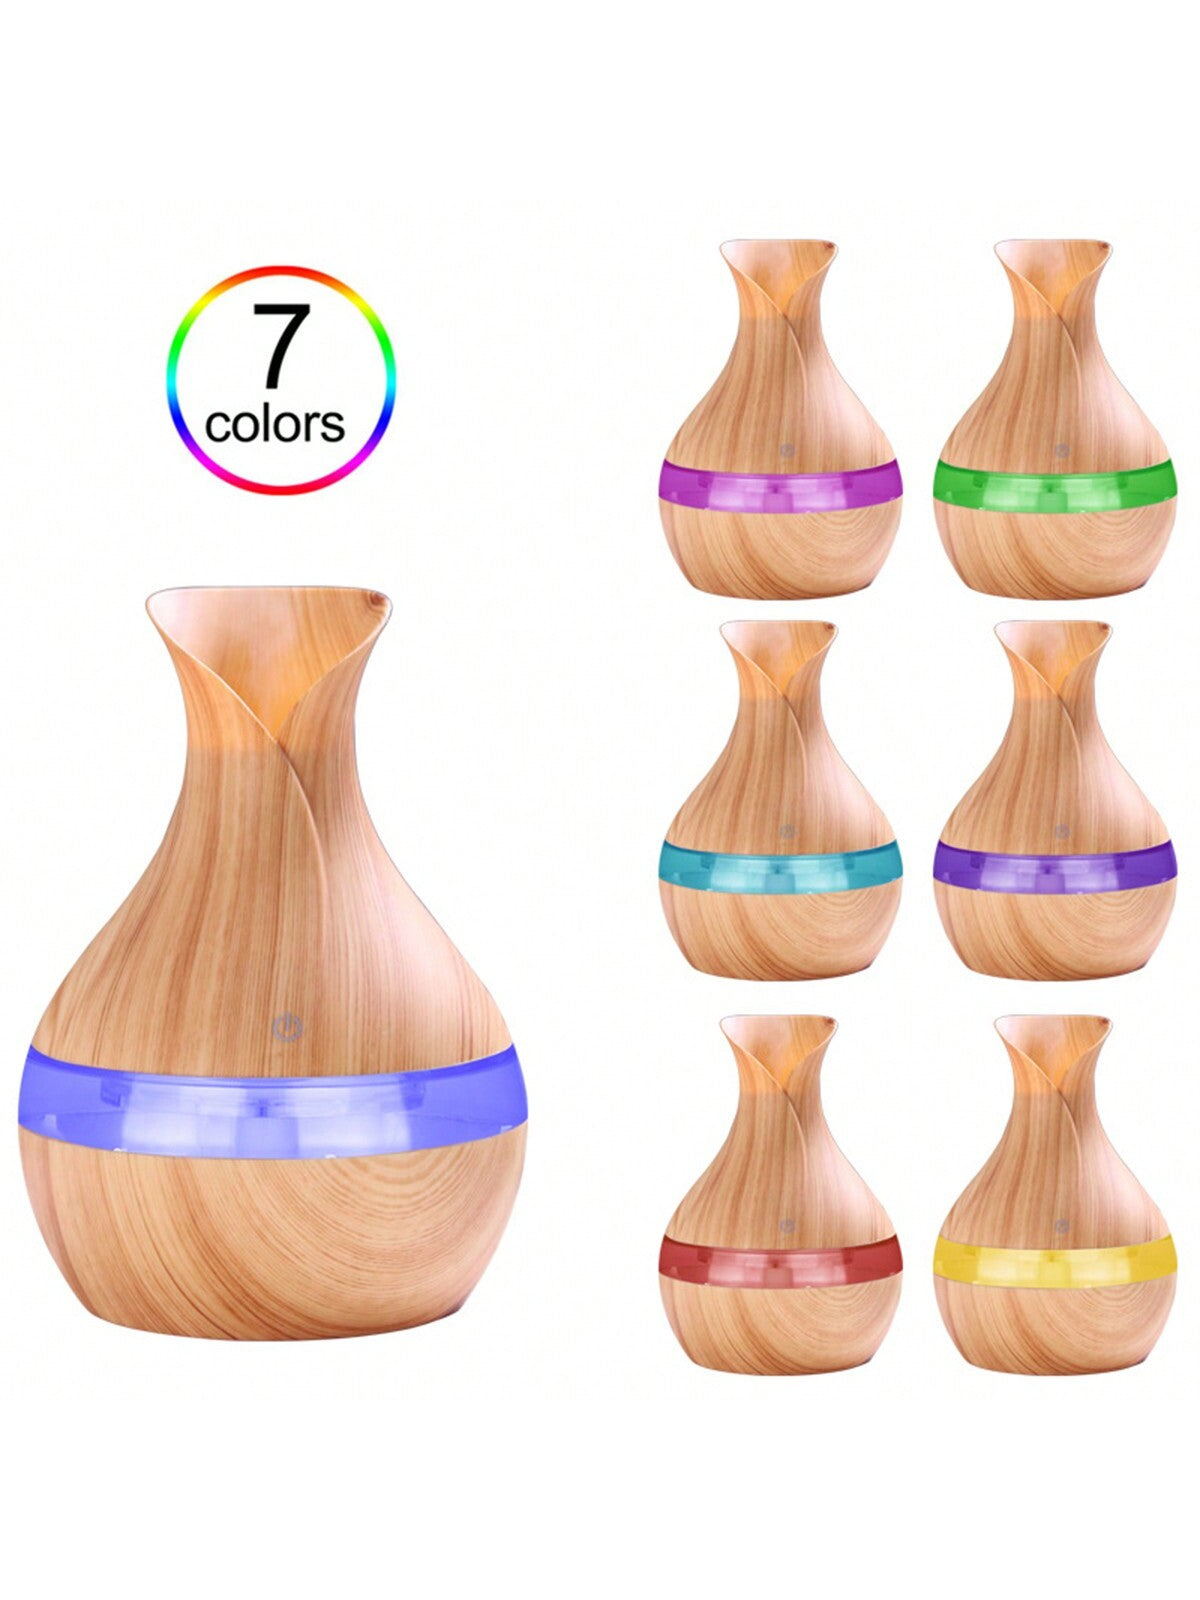 1pc Portable Usb Desktop Wood-grain Color Flowerpot Humidifier, Aromatherapy Diffuser, Water Replenishing Device, Air Purifier Suitable For Home, Bedroom, Outdoor, Travel-dark wood color-3